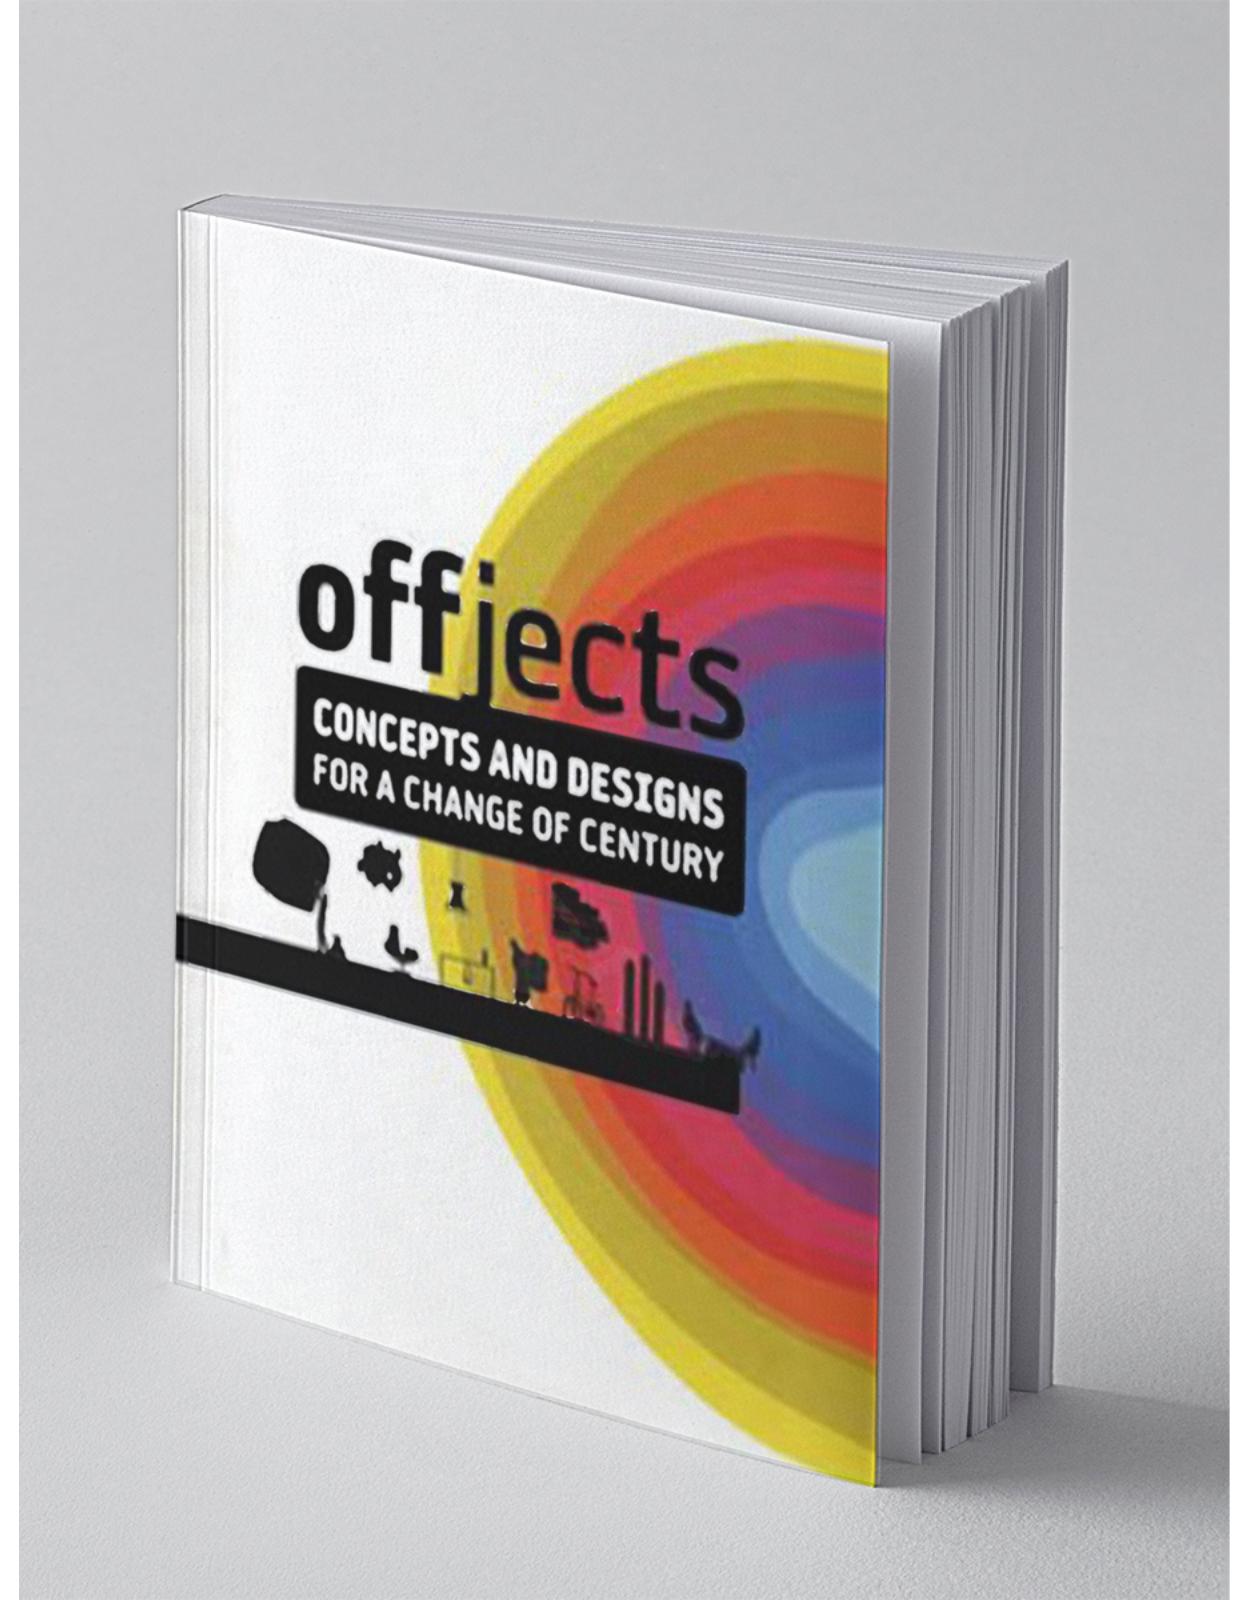 Offjects: Designs and Concepts for a New Century